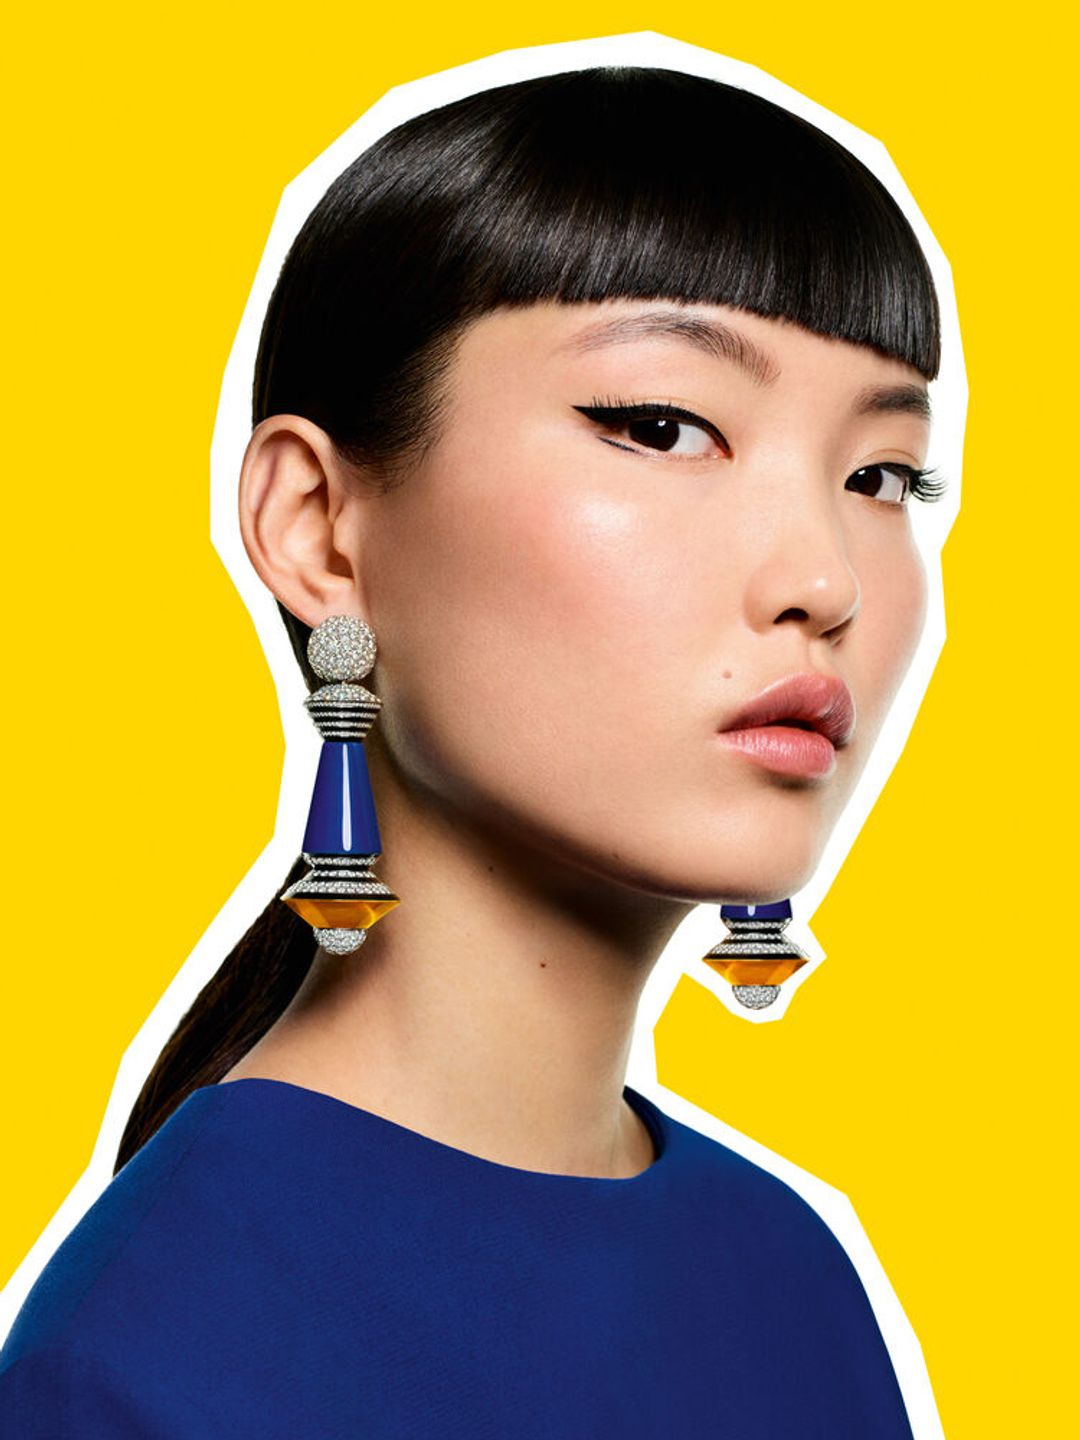 Earrings inspired by hoodie strings are part of the avant-garde collection